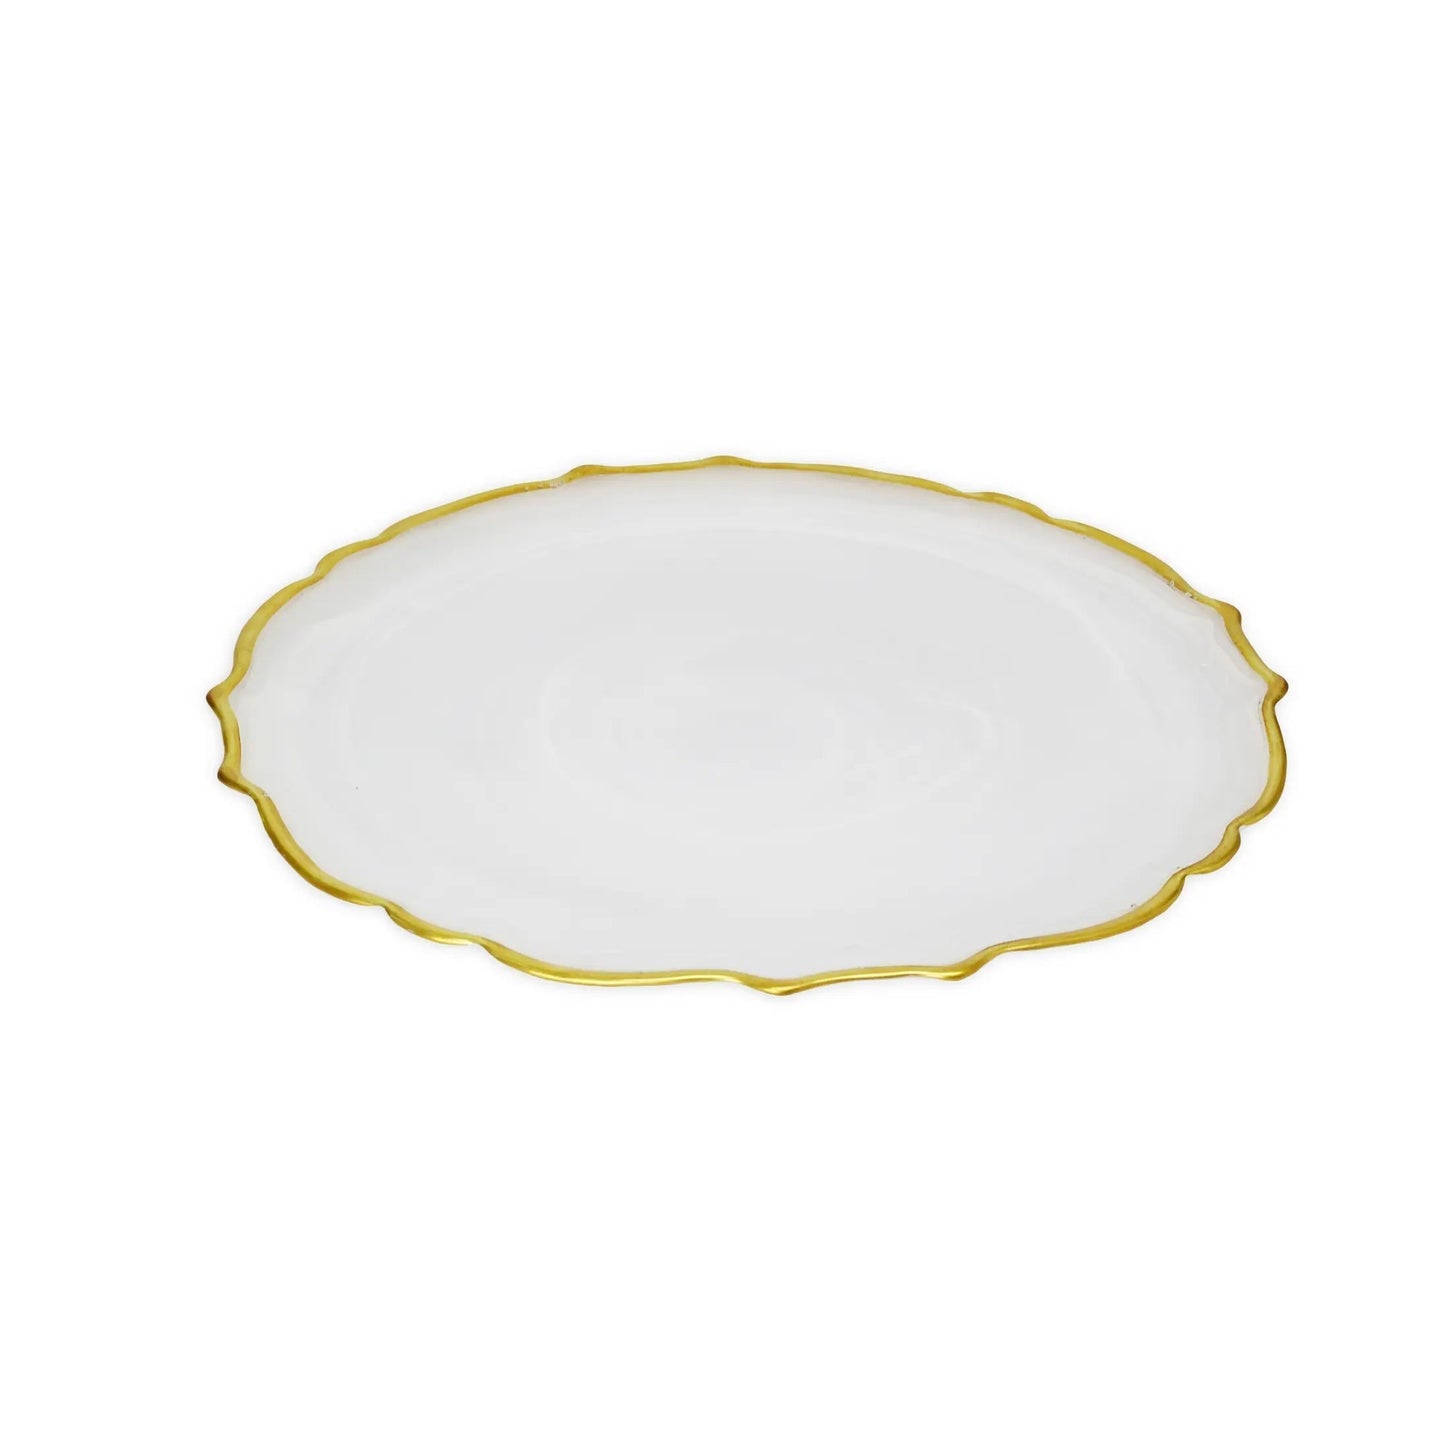 11"D Set Of 4 Alabaster White Dinner Plates with Gold Trim Plates High Class Touch - Home Decor 